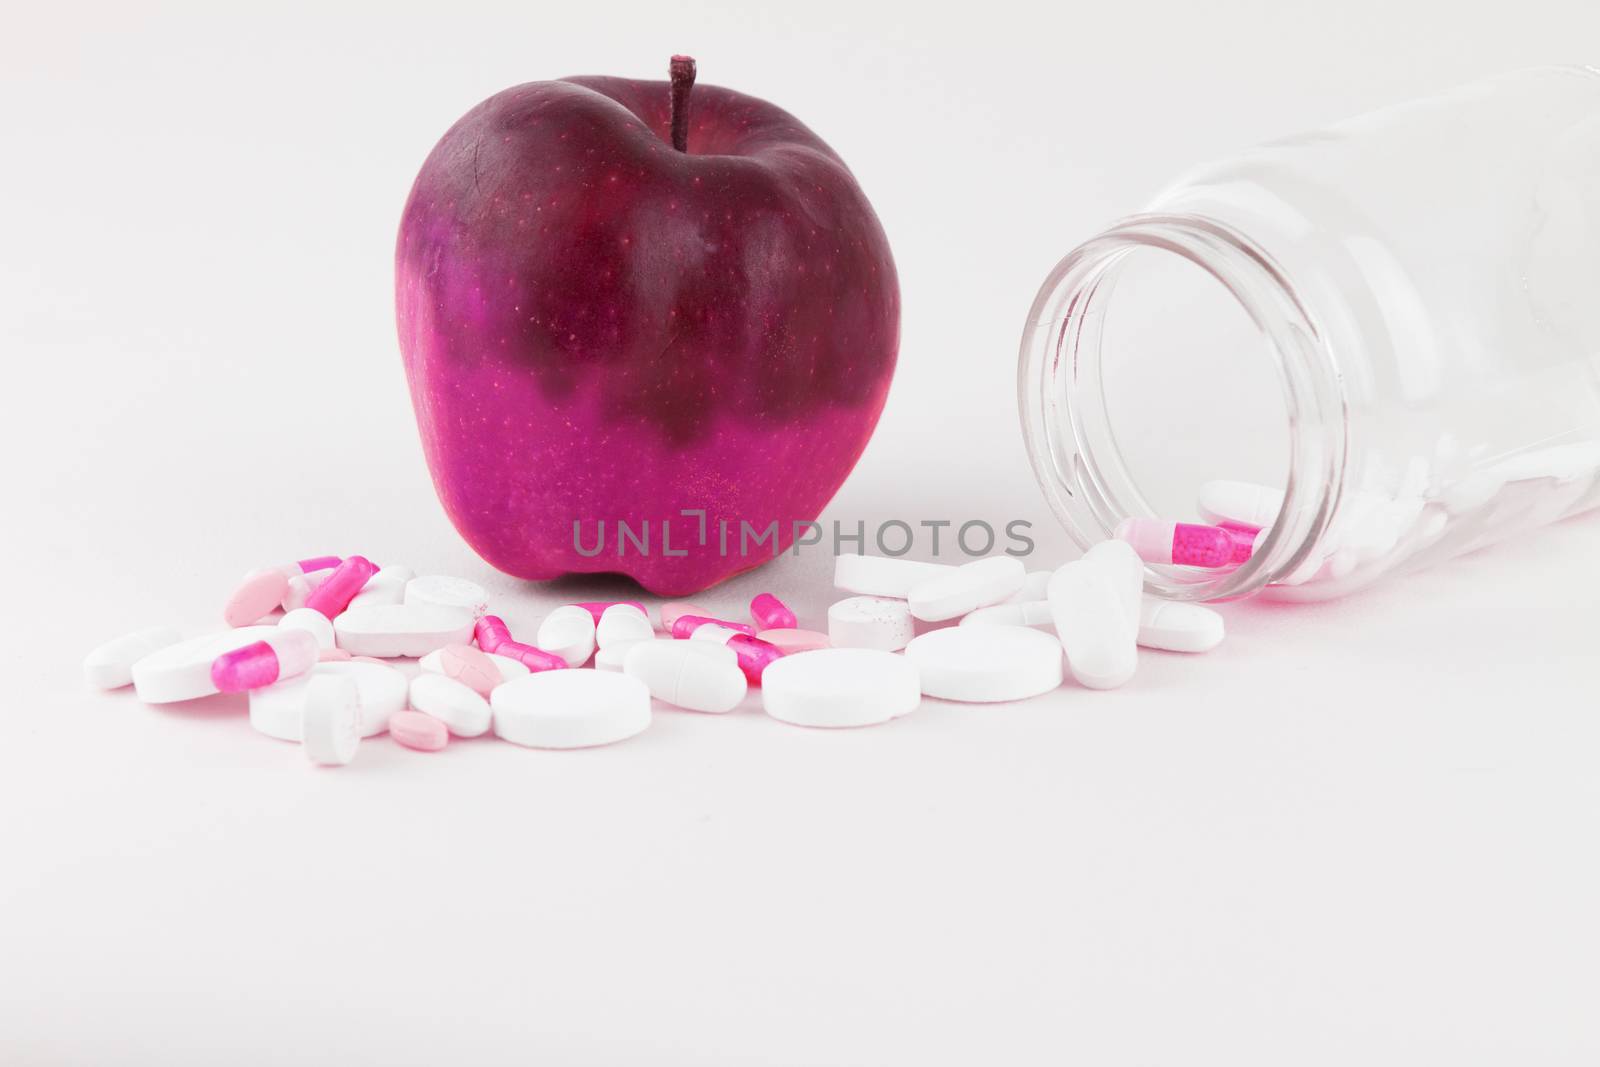 Concept: human GMO manipulation of nature and relative poisoned fruits. Close-up of an apple contaminated by changing color from the medicines in front of it on a white background